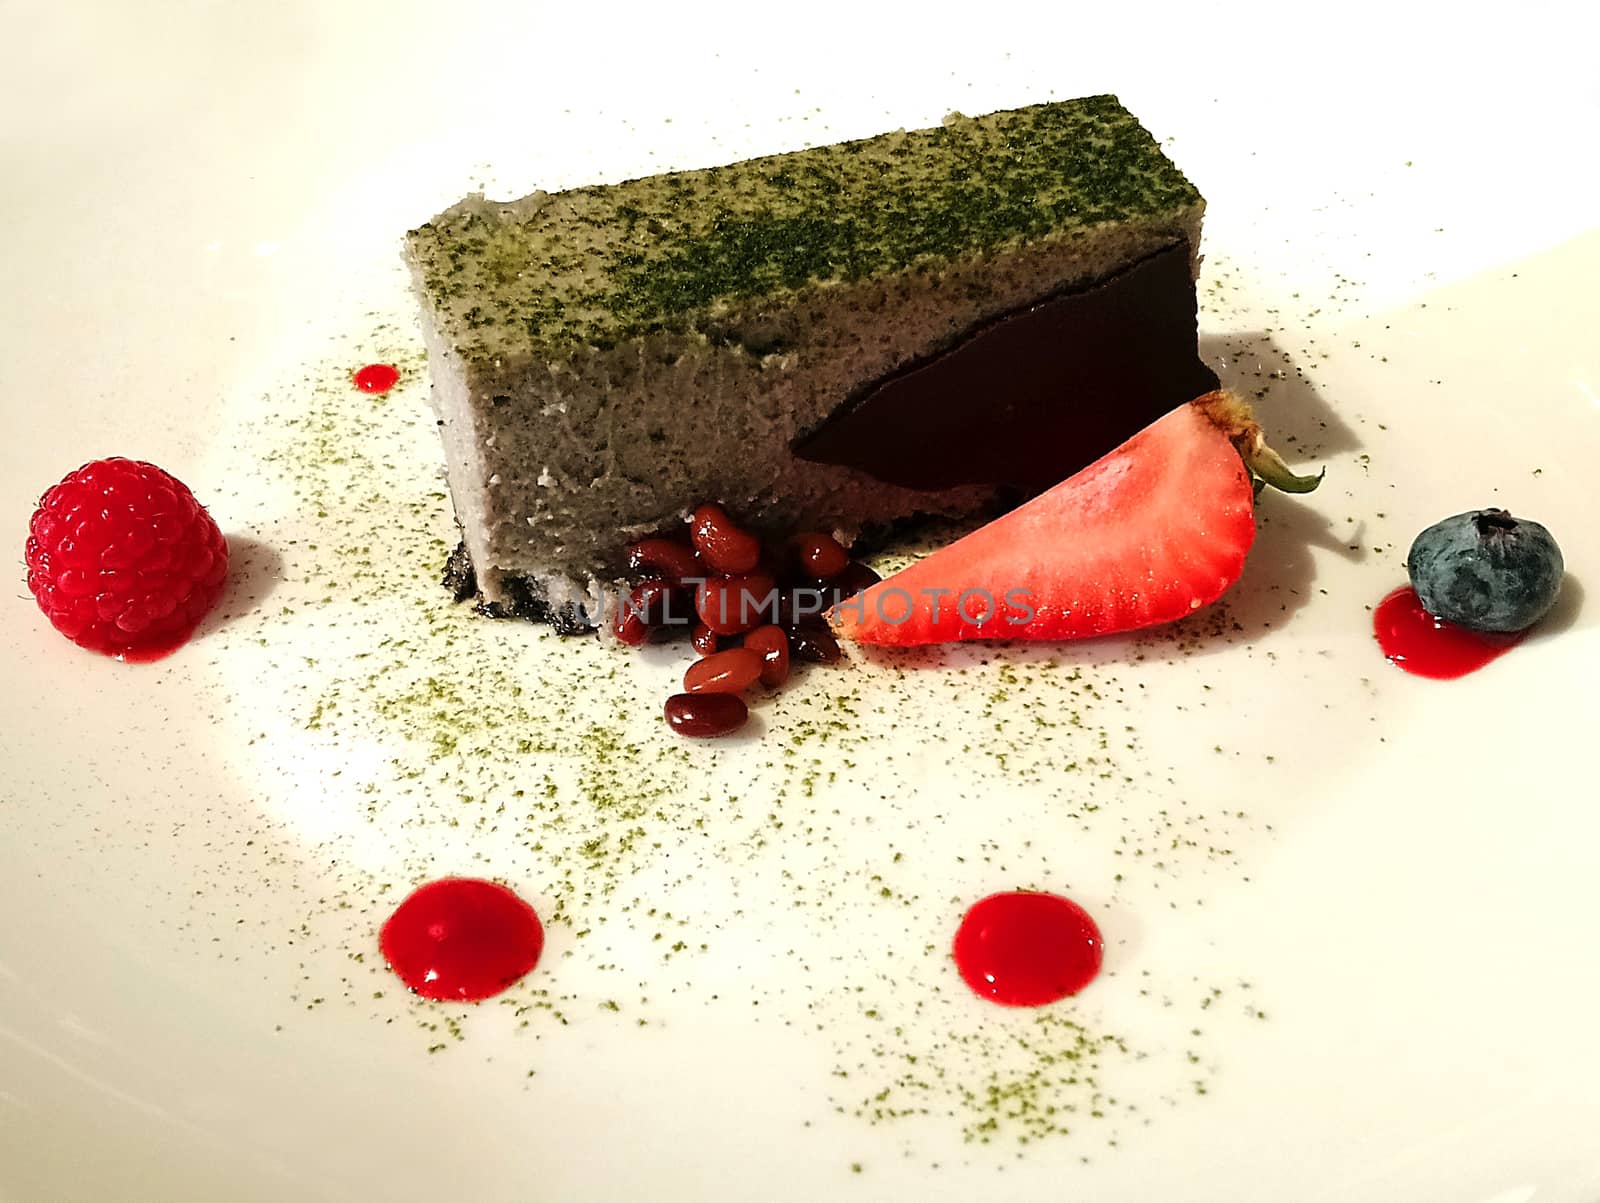 Chocolate cake with matcha powder and berries on white plate  by imwaltersy